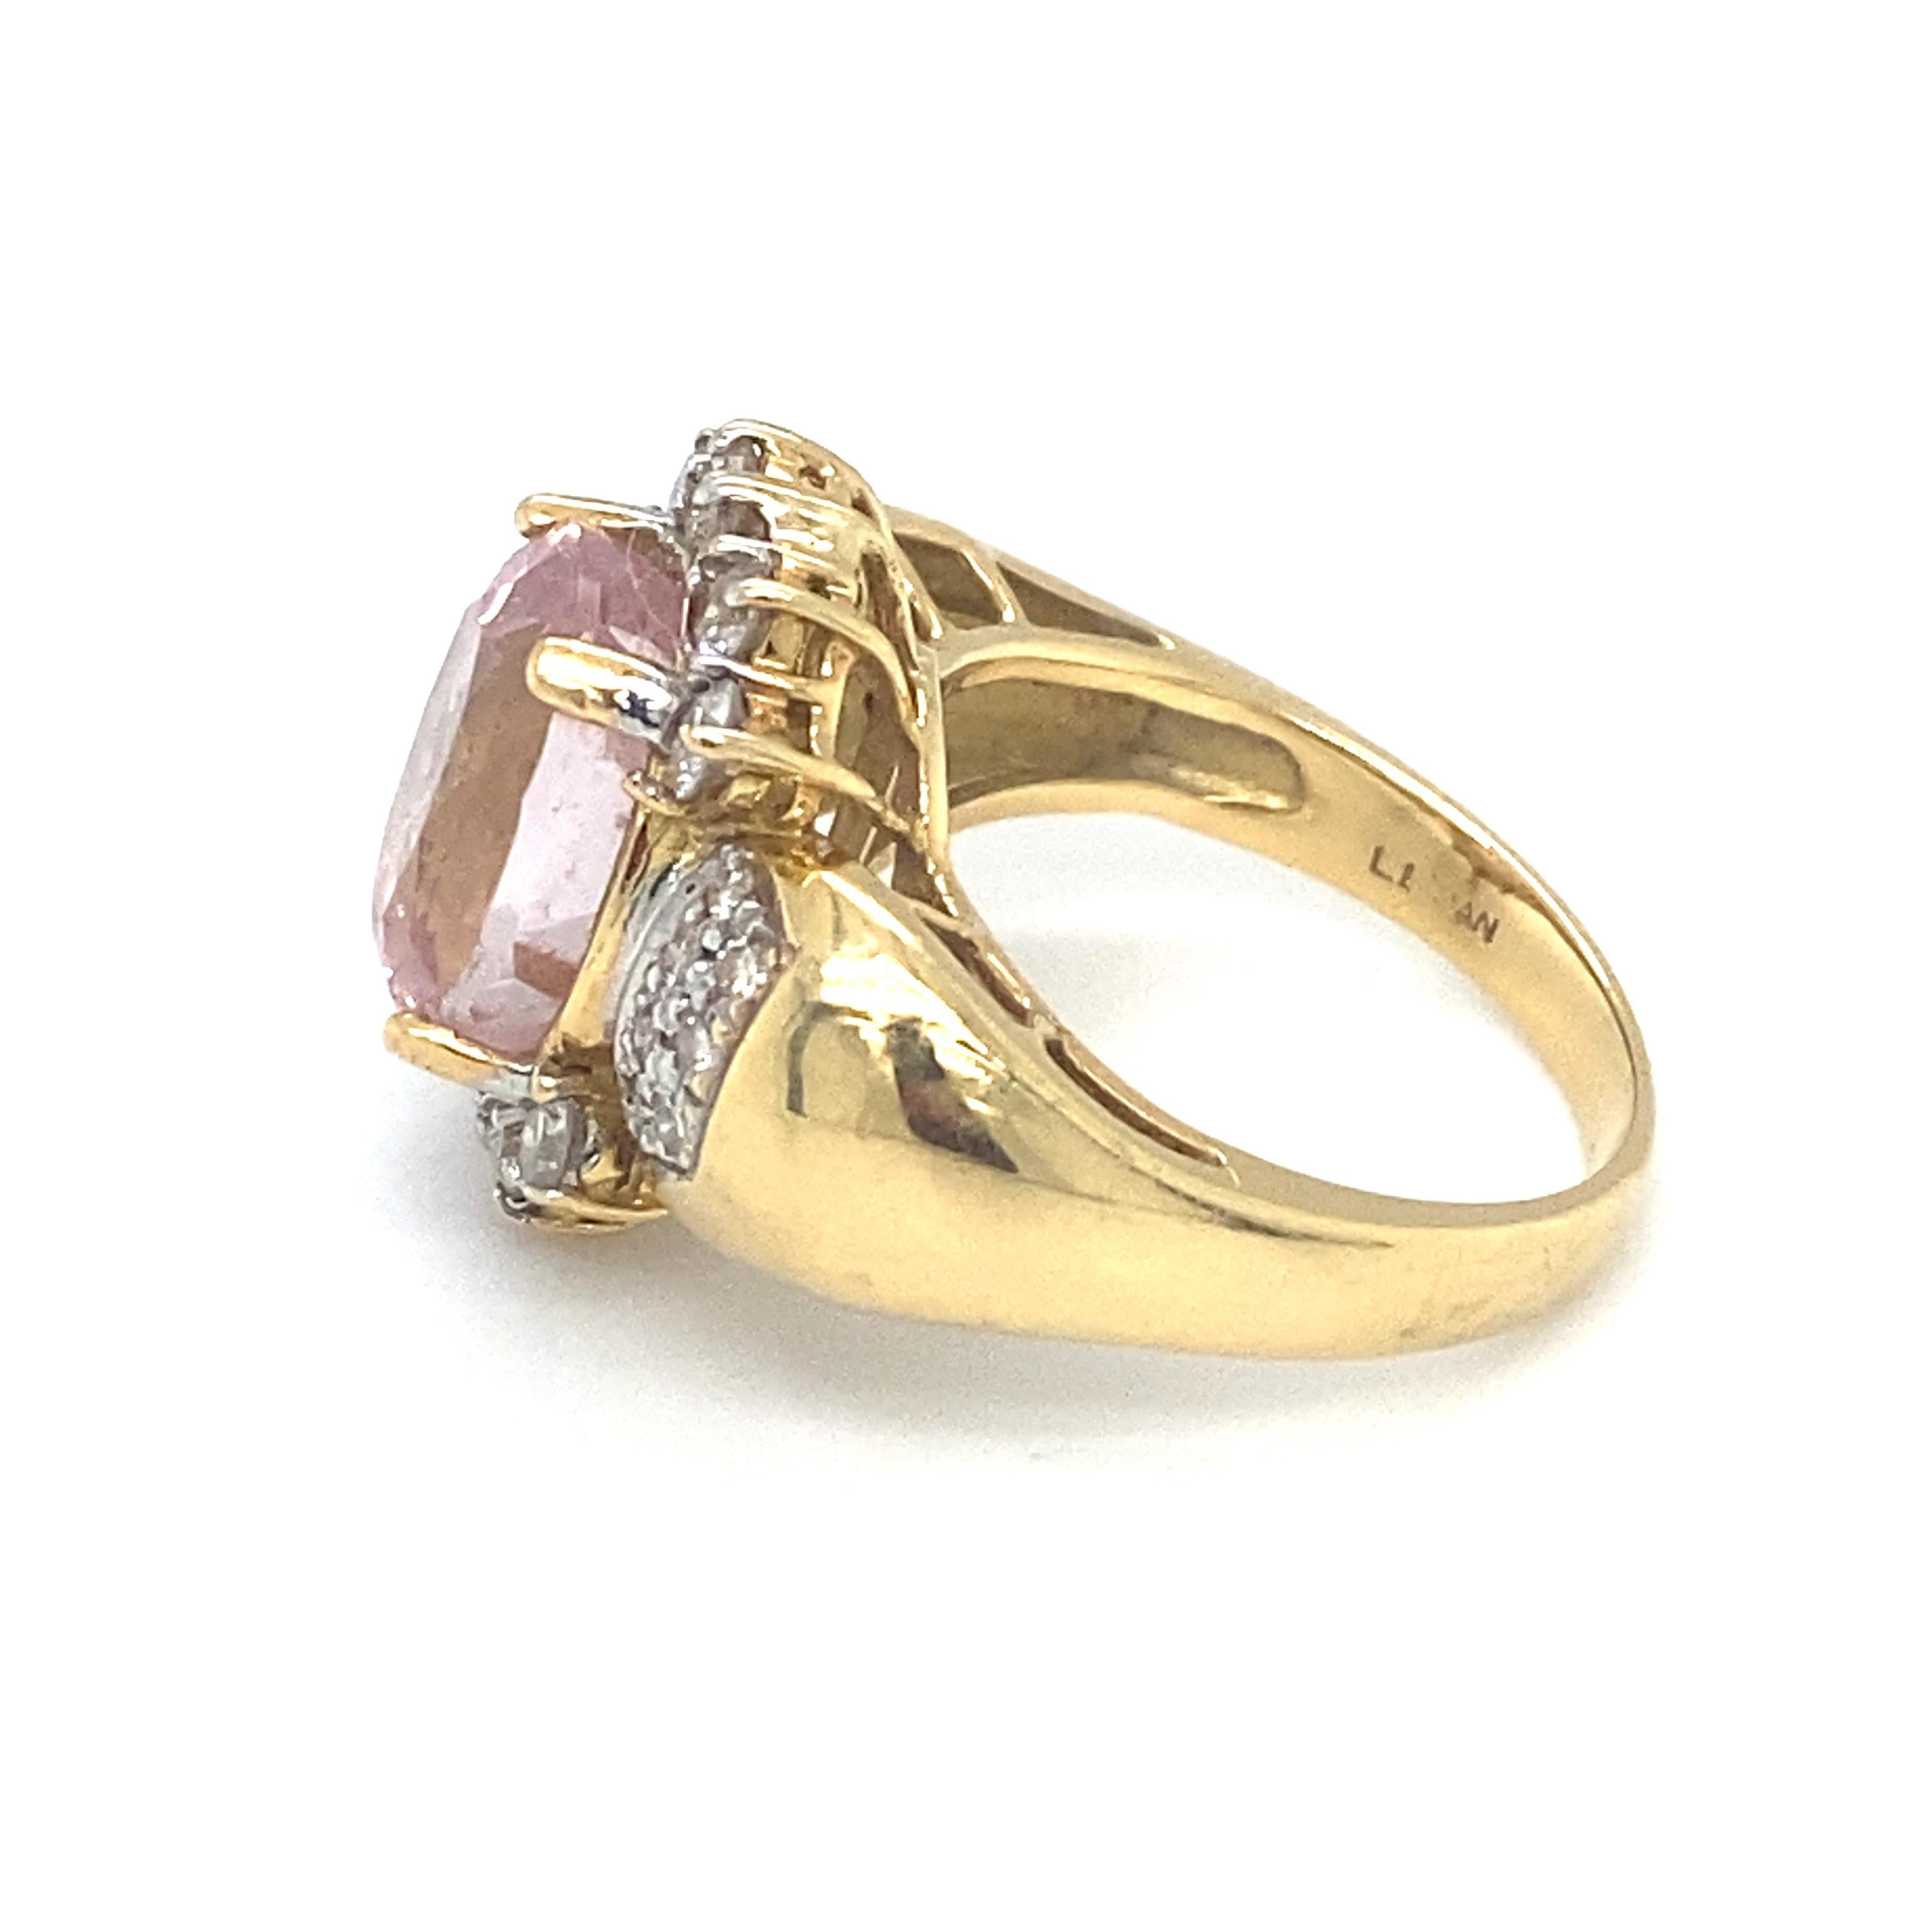 Oval Cut Le Vian 3.0ct Kunzite and Diamond Cocktail Ring in 18k Gold For Sale